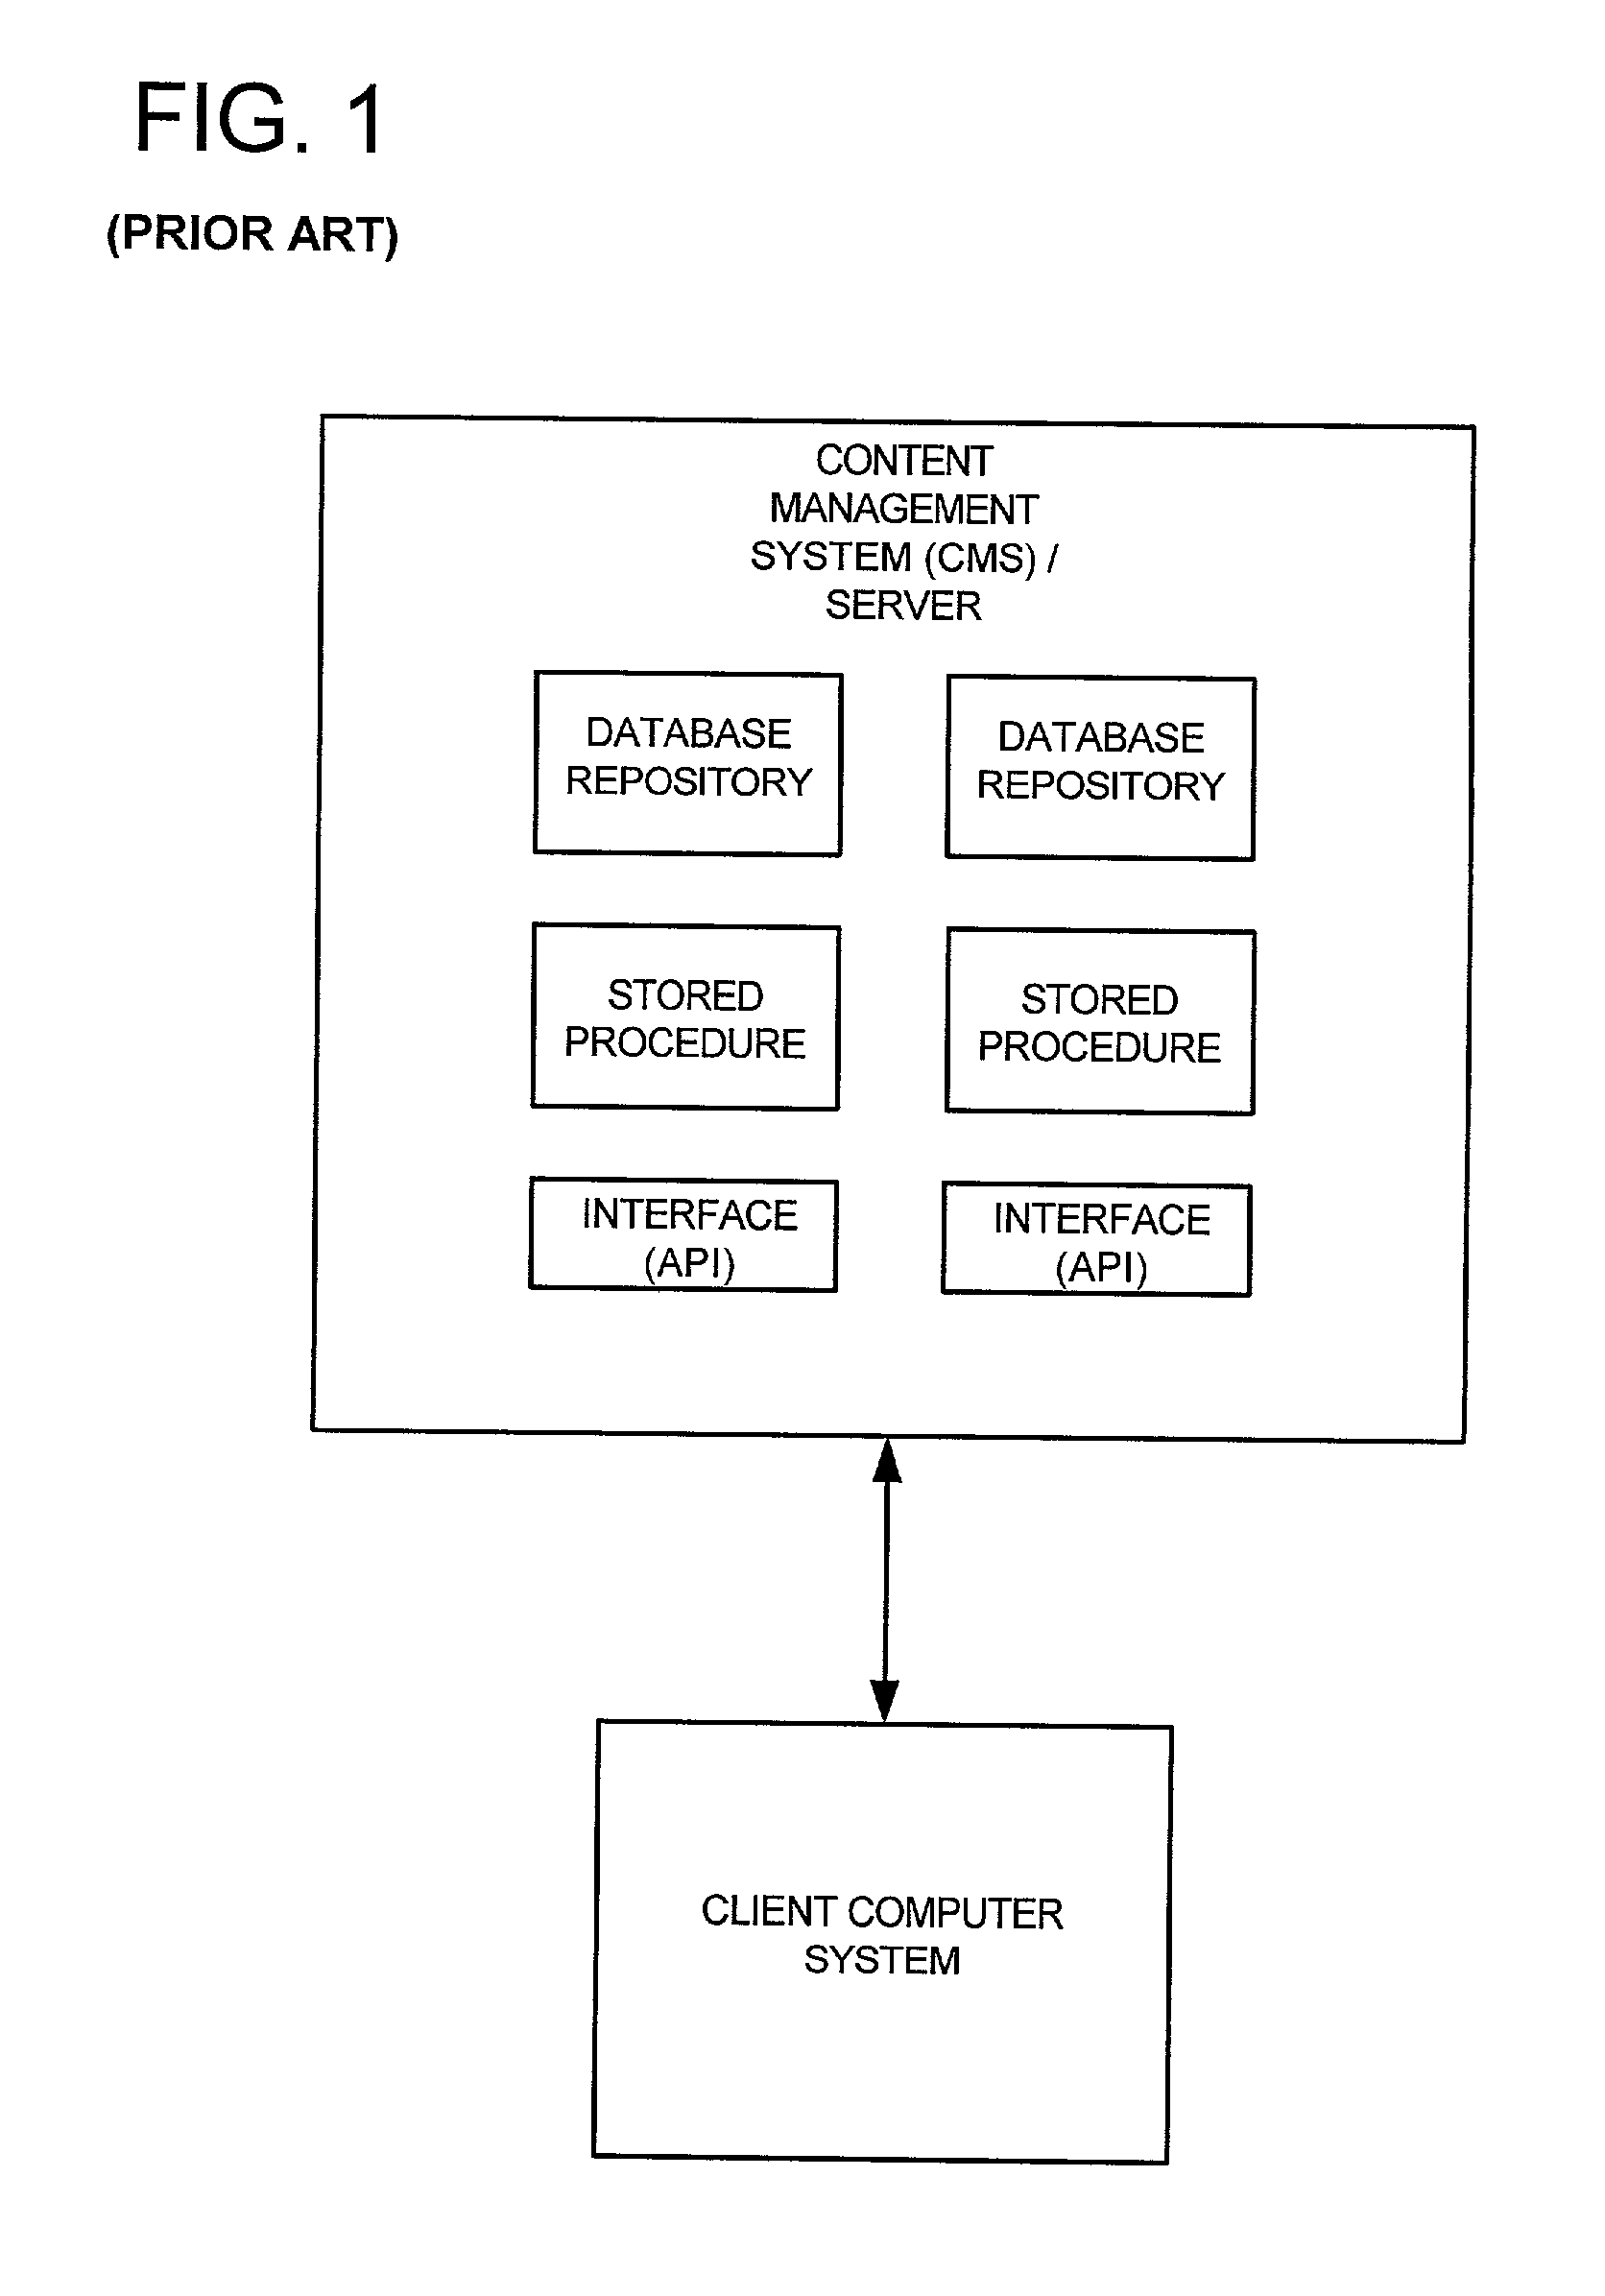 Method and apparatus of parameter passing of structured data for stored procedures in a content management system